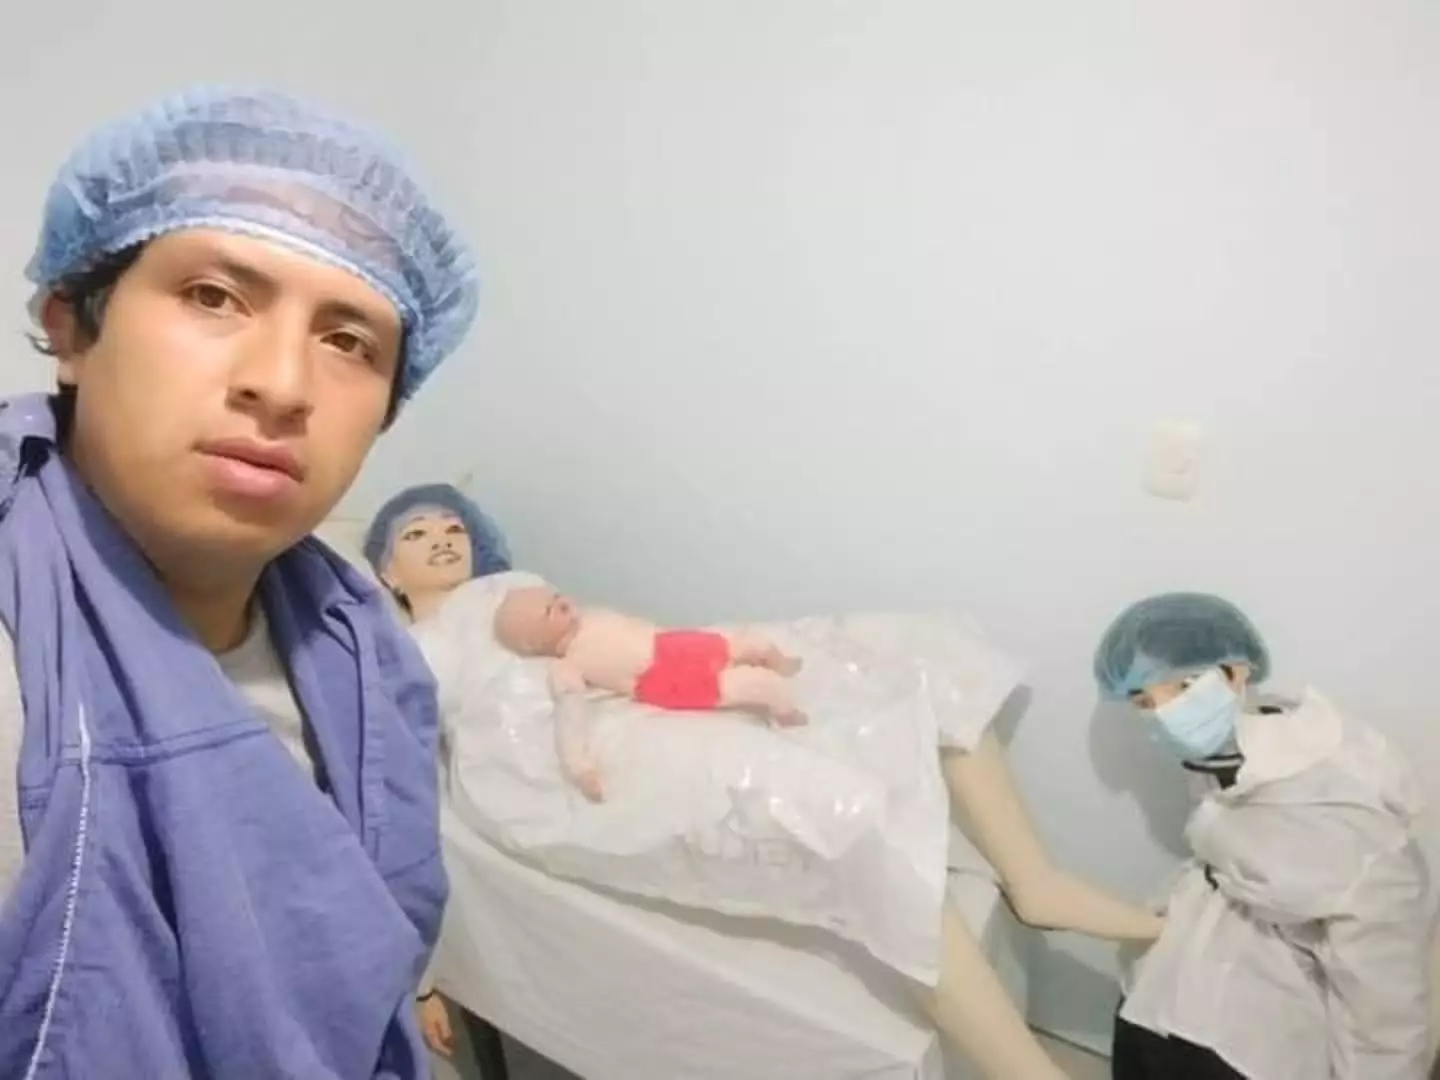 Cristian and Natalia welcomed their third baby.